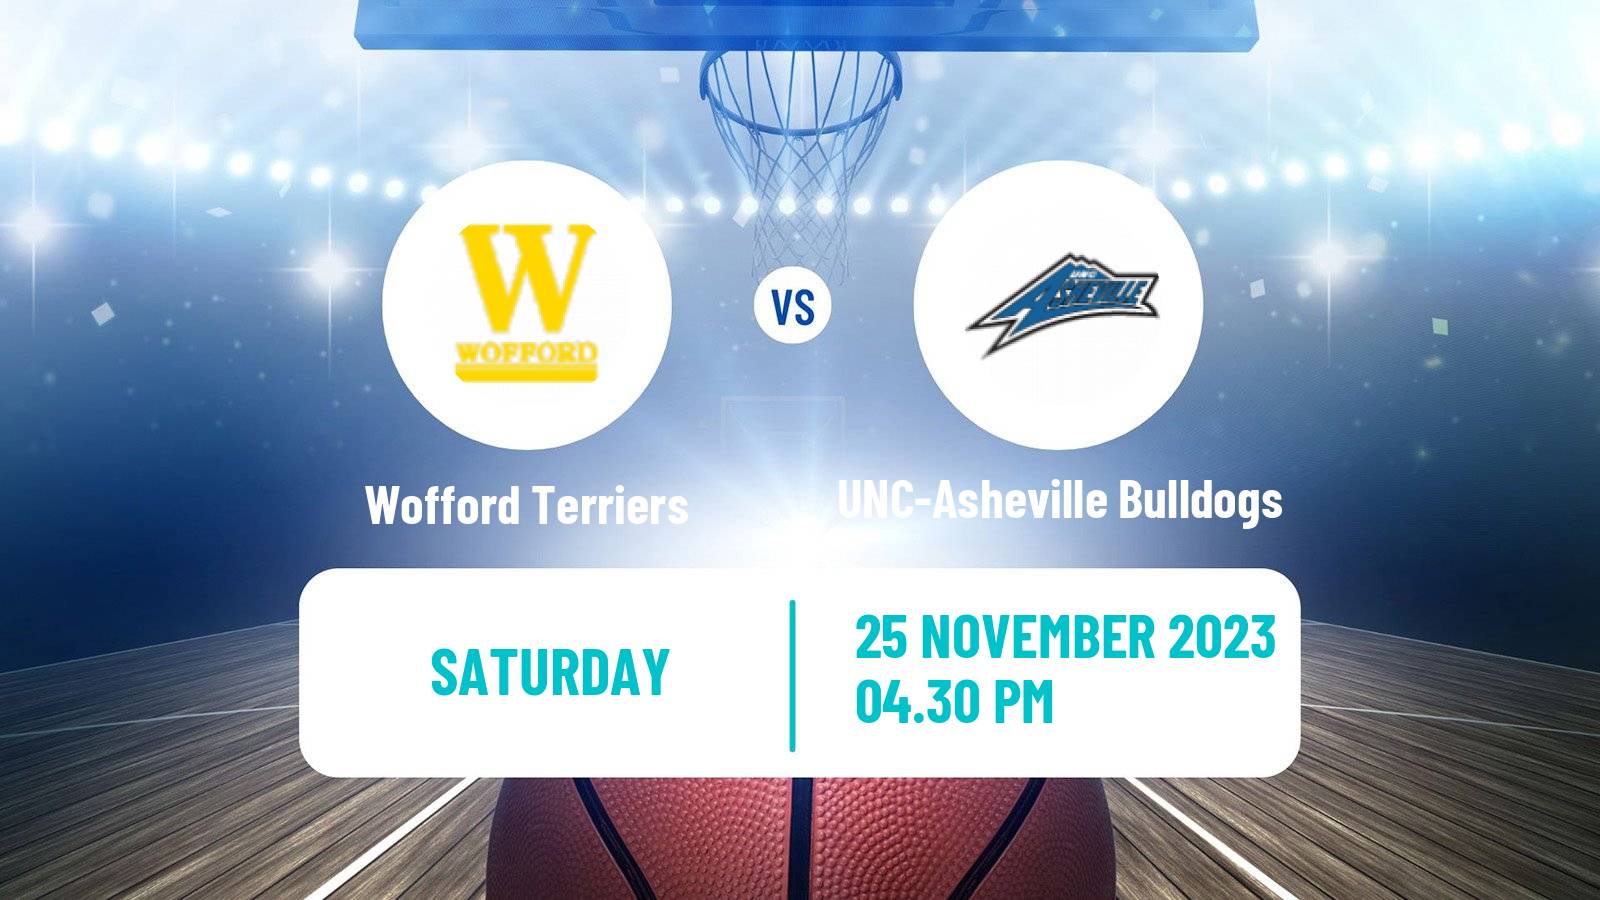 Basketball NCAA College Basketball Wofford Terriers - UNC-Asheville Bulldogs